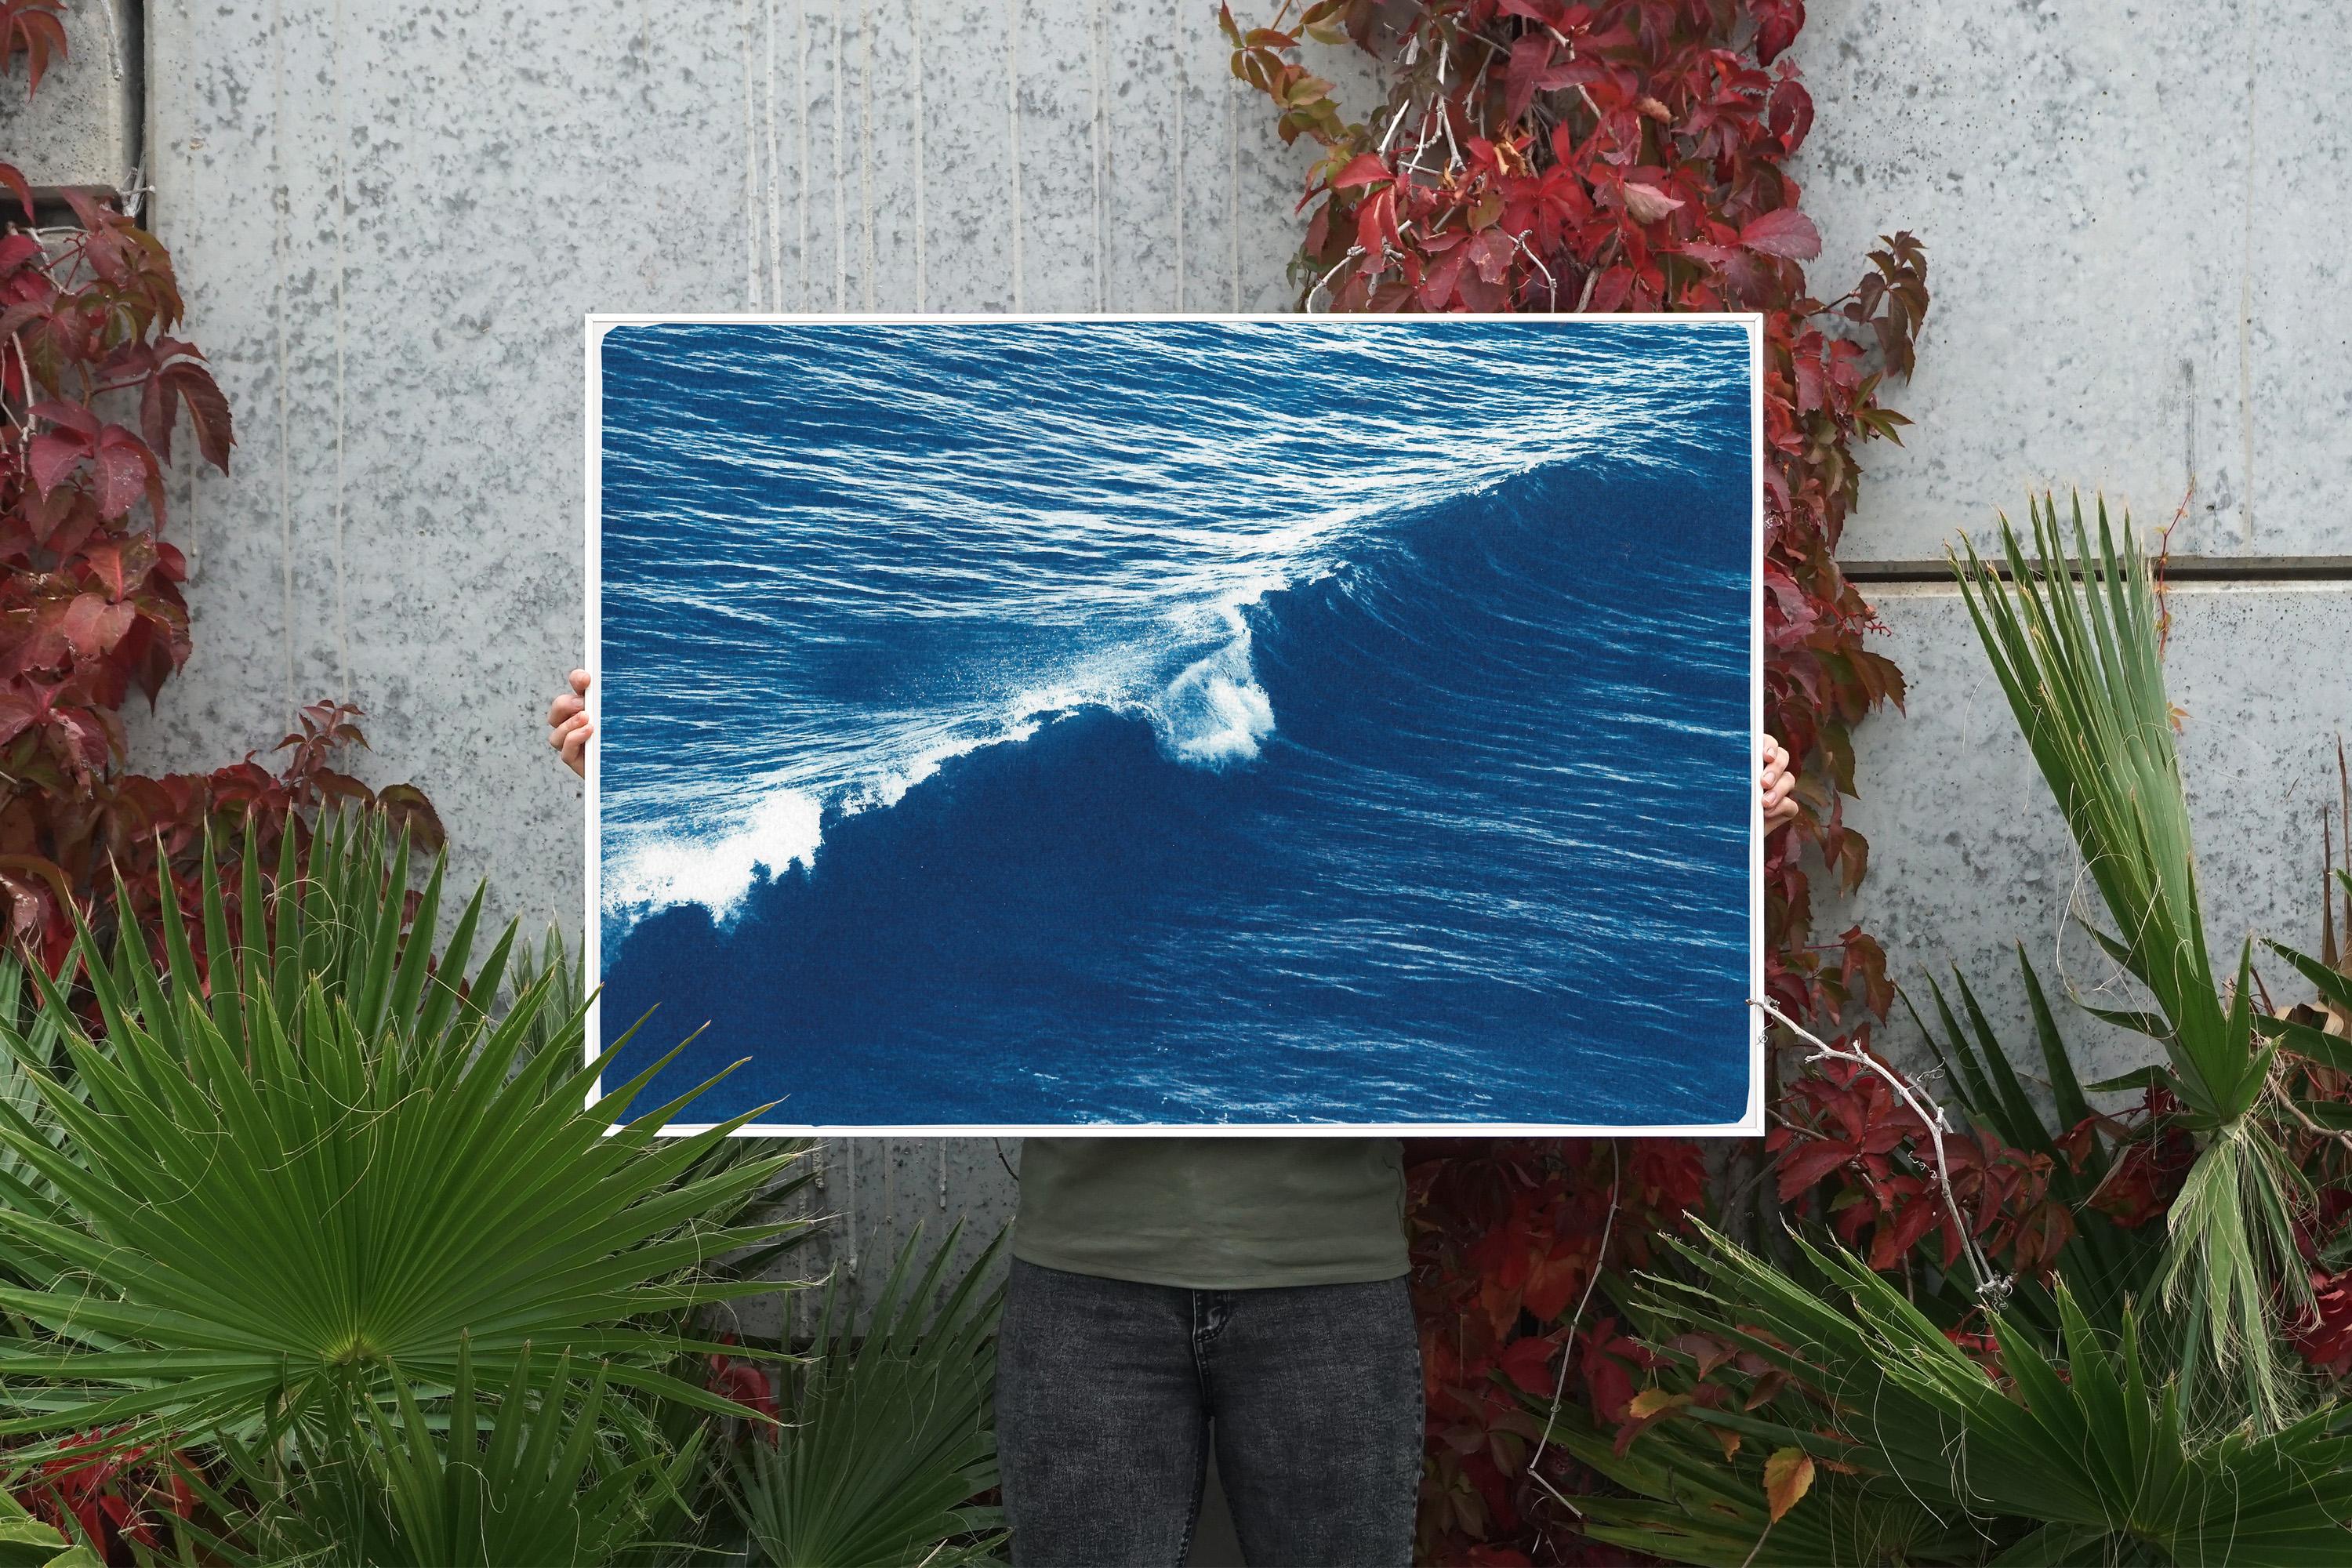 Venice Beach Seascape, Long Wave, Nautical Scene in Blue Tones, Limited Edition - Realist Art by Kind of Cyan